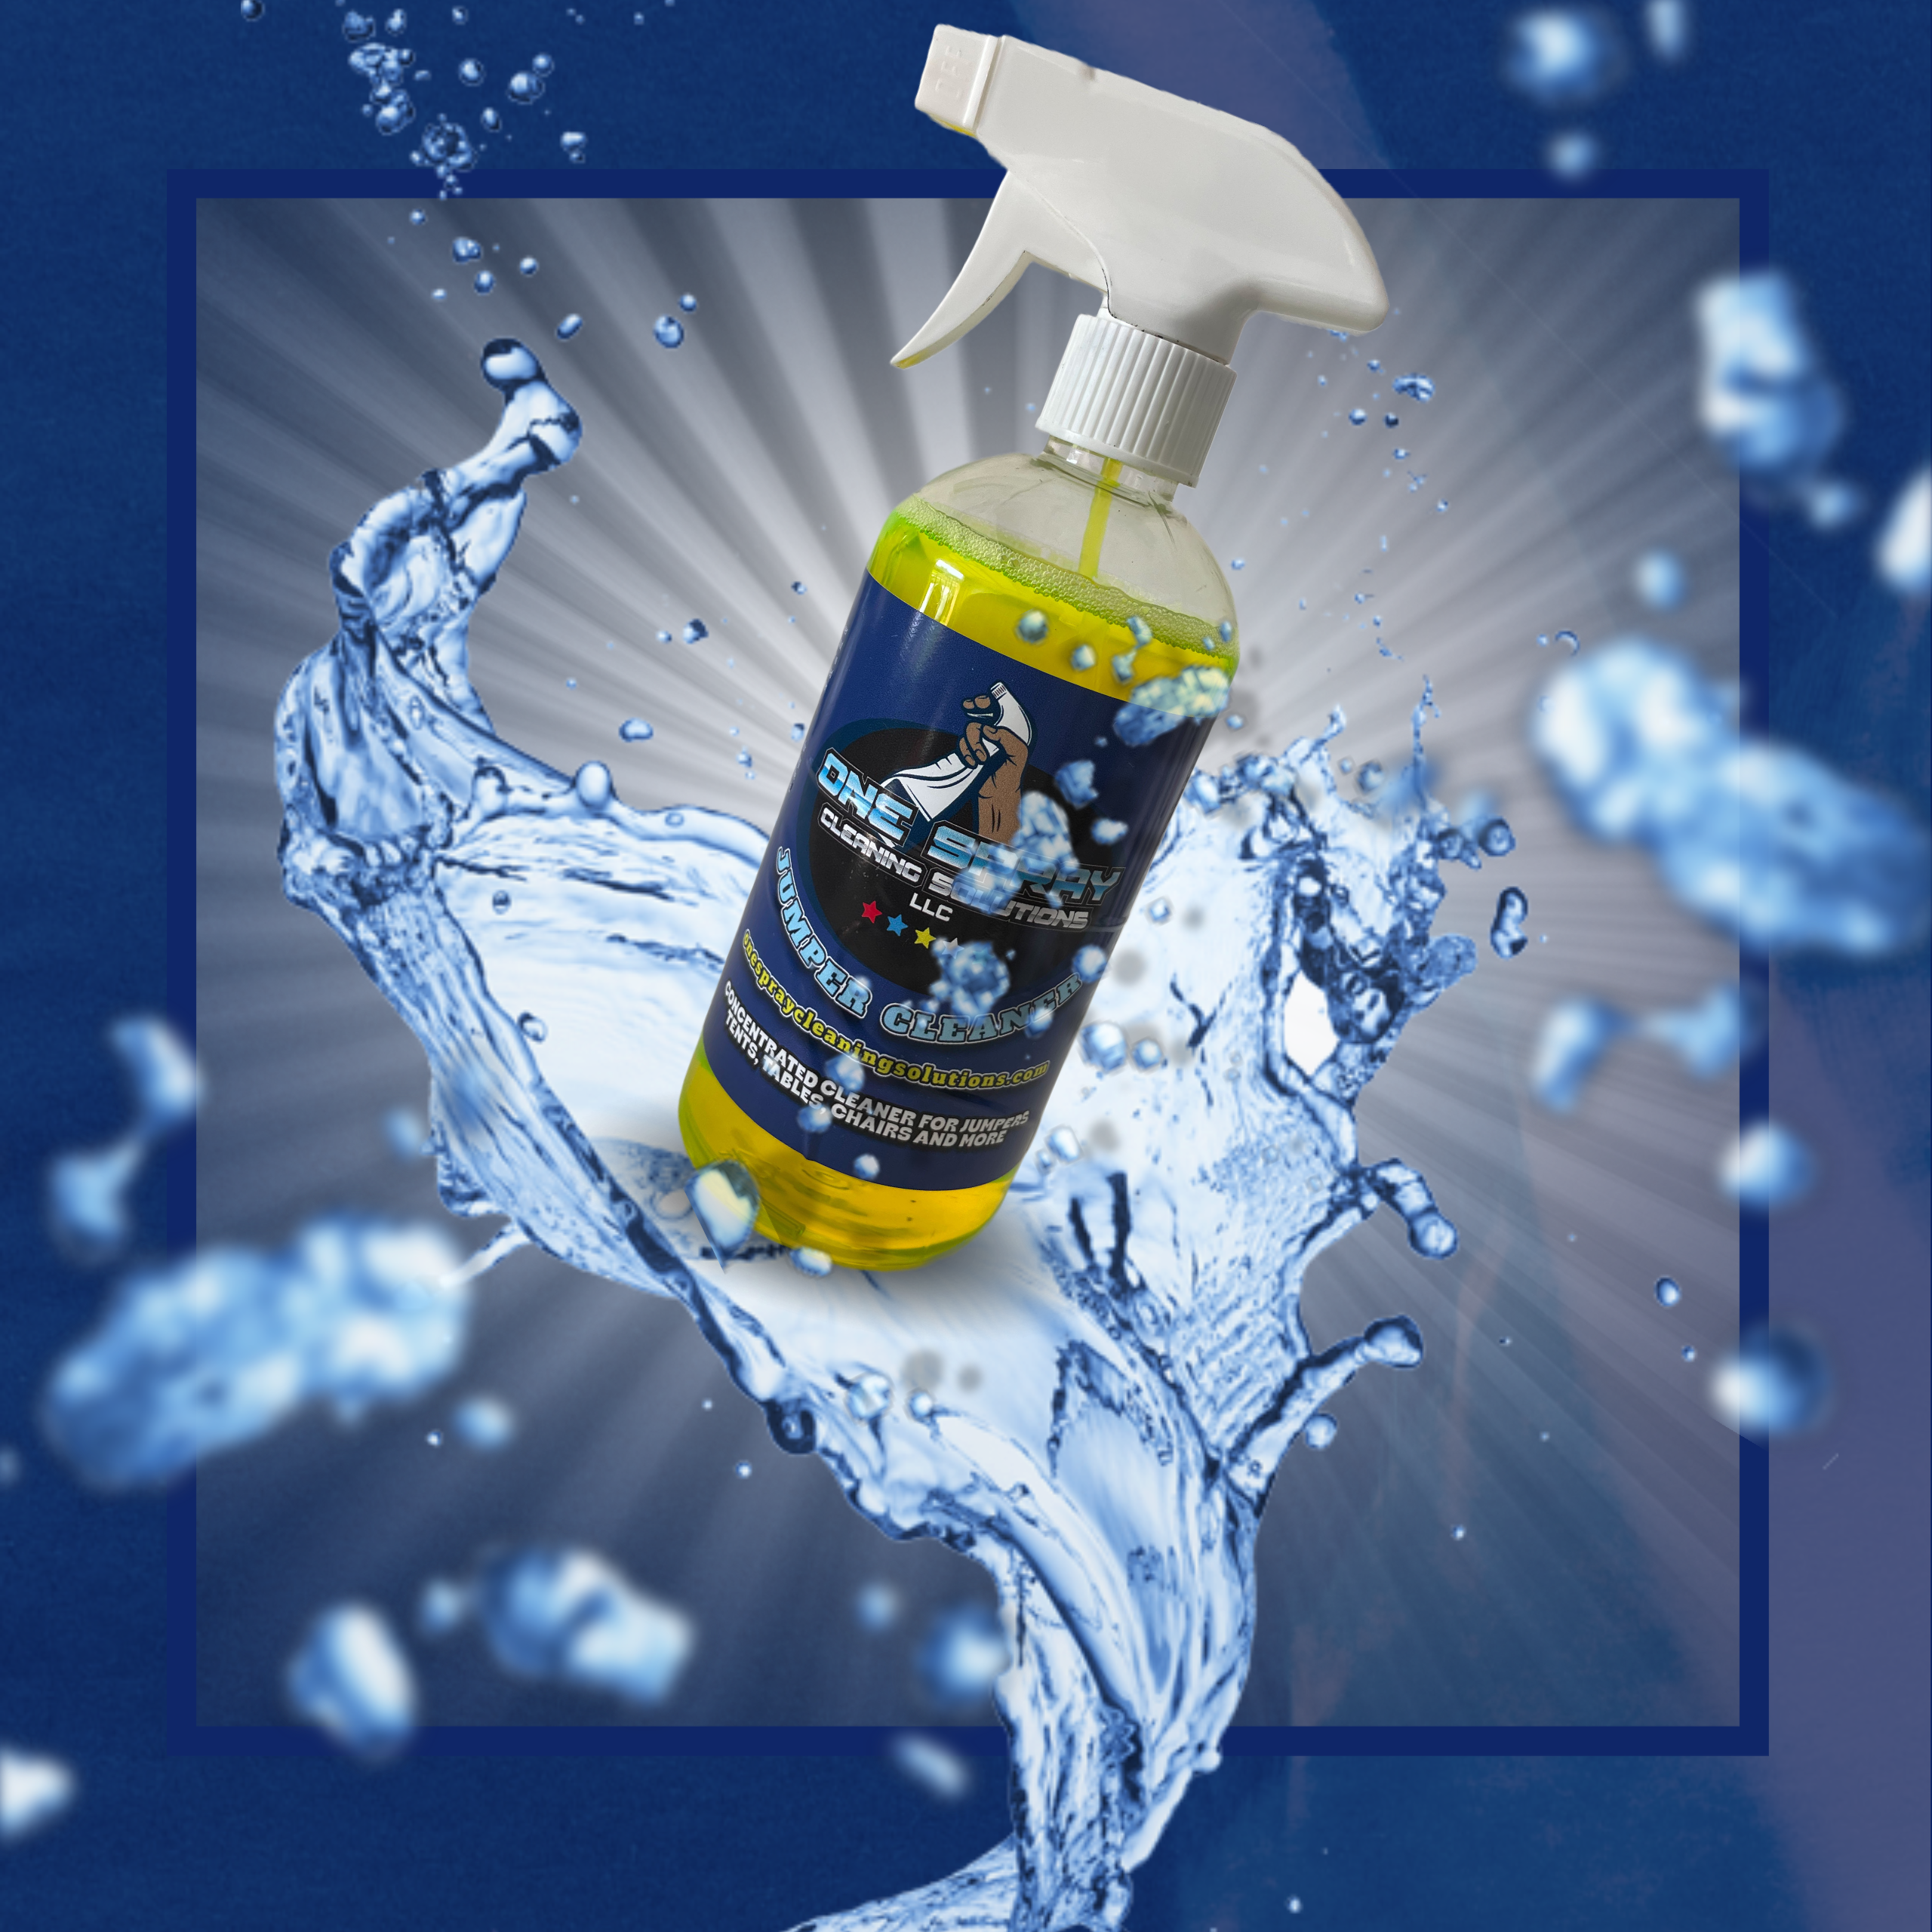 16oz) ONE SPRAY BATHROOM CLEANER – One Spray Cleaning Solutions